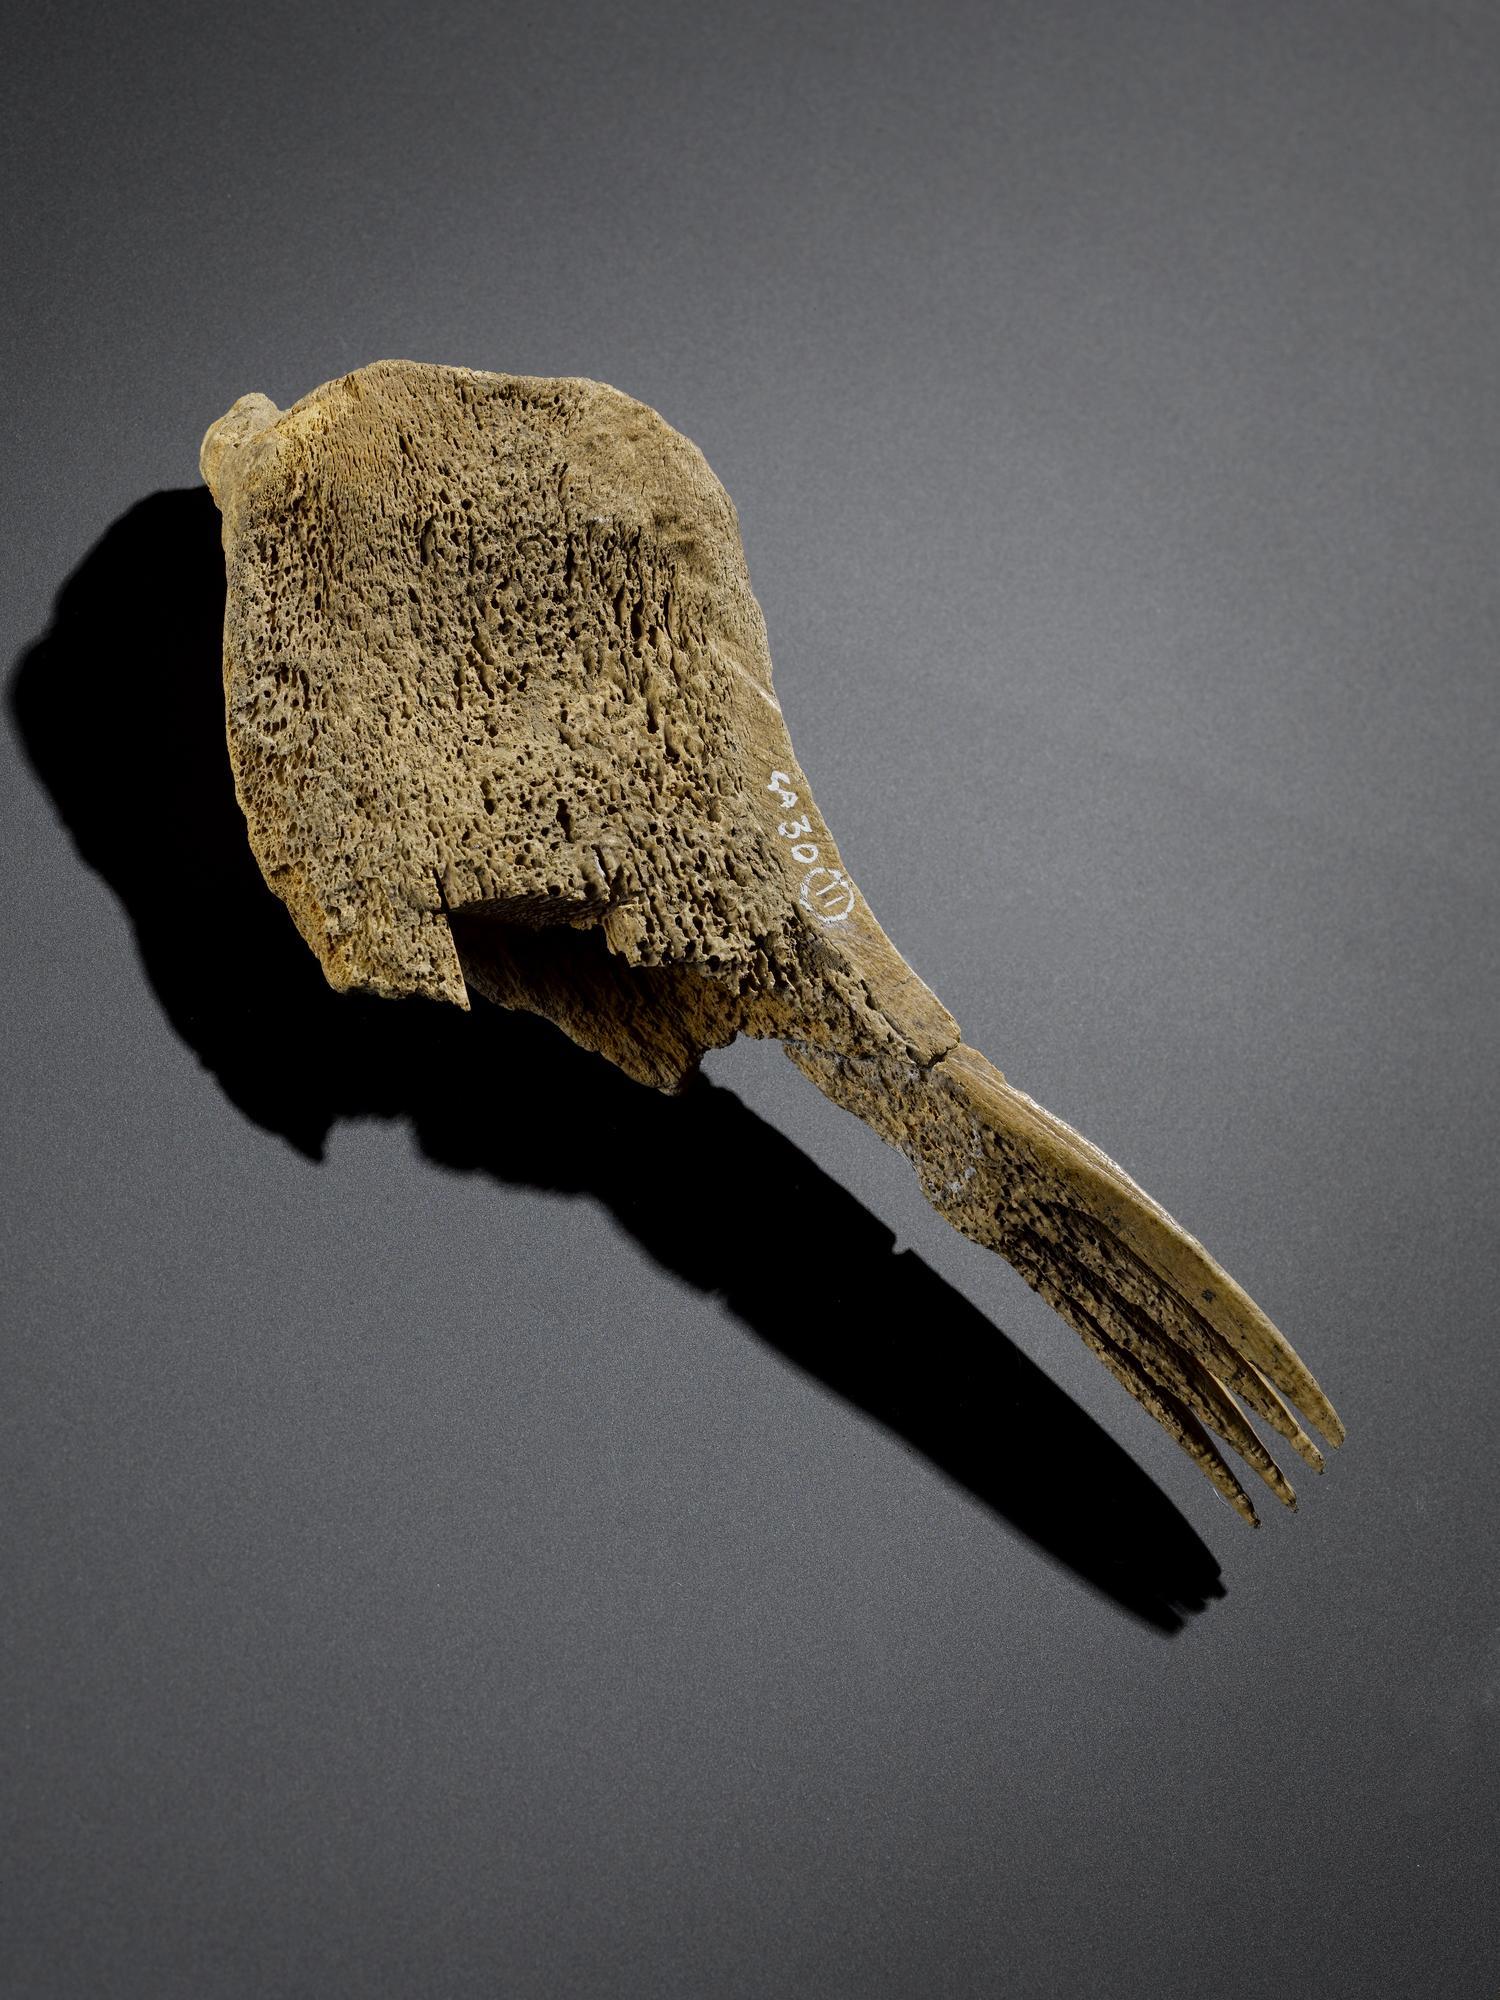 Image of Pin or bodkin or implement, from a broch in Orkney © National Museums Scotland